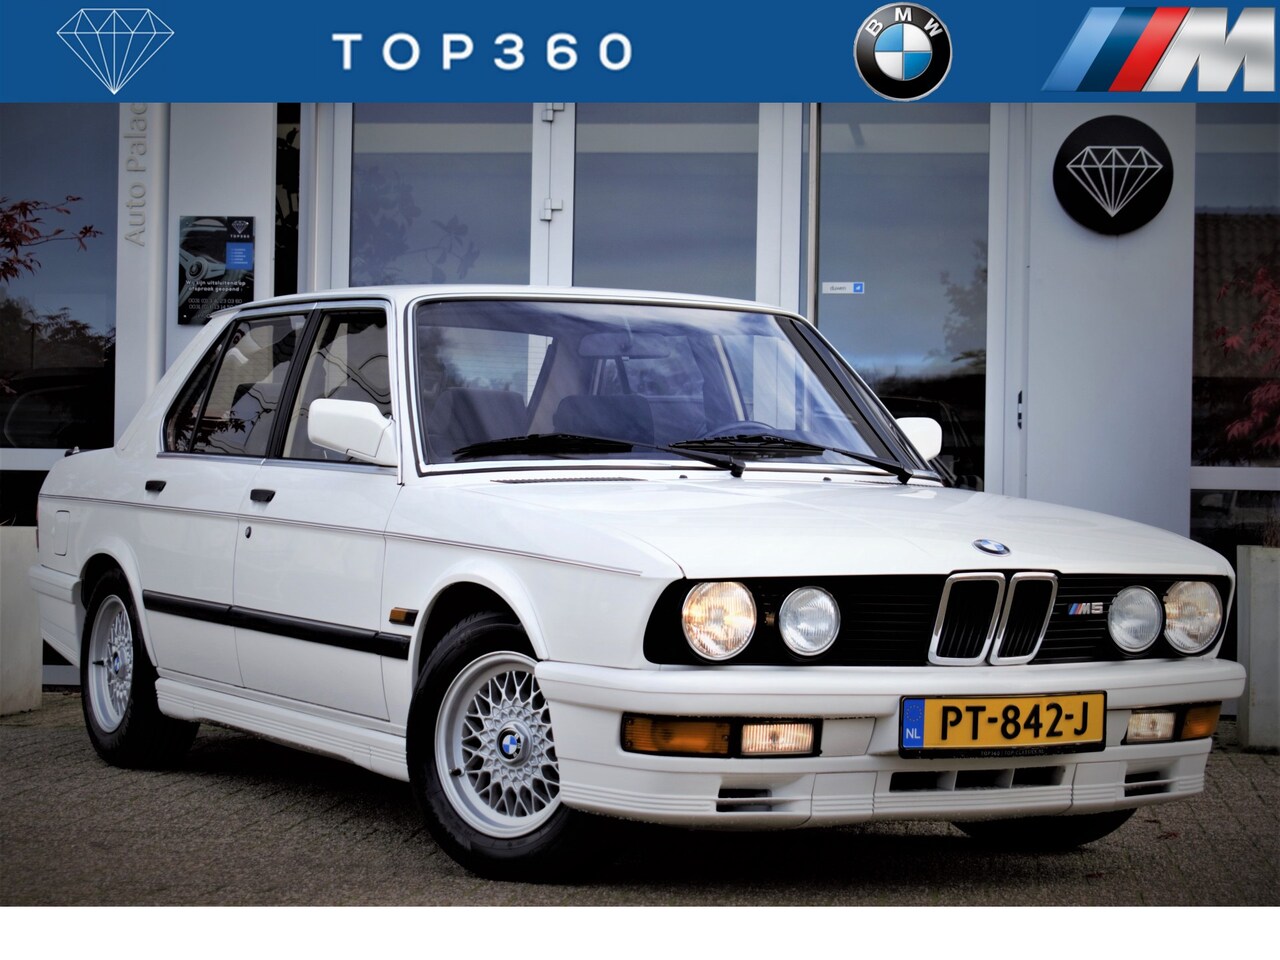 Bmw E28 M535i Used Search For Your Used Car On The Parking